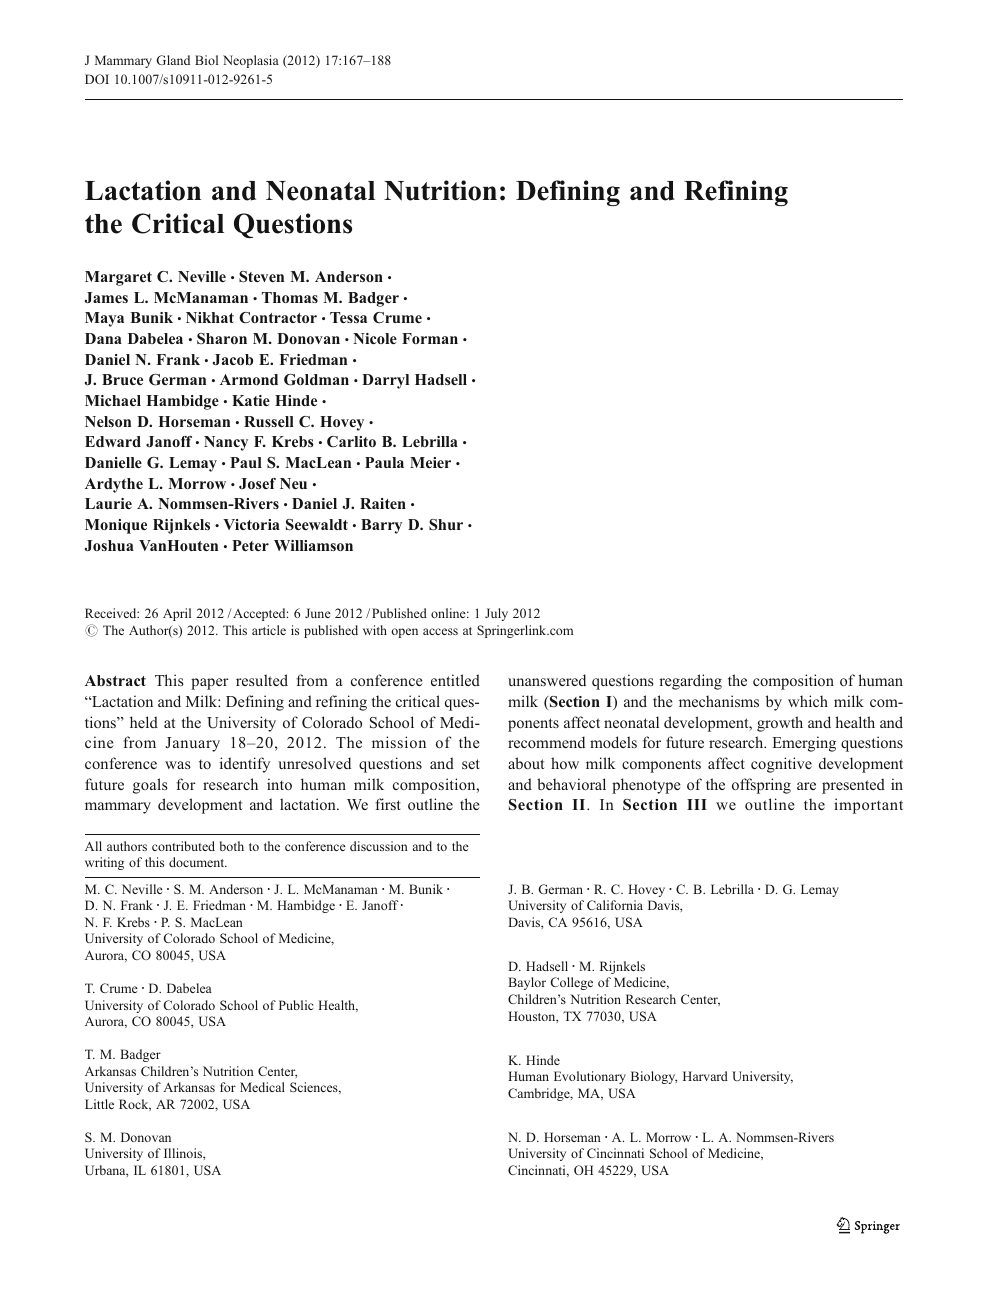 Lactation And Neonatal Nutrition Defining And Refining The Critical Questions Topic Of Research Paper In Biological Sciences Download Scholarly Article Pdf And Read For Free On Cyberleninka Open Science Hub